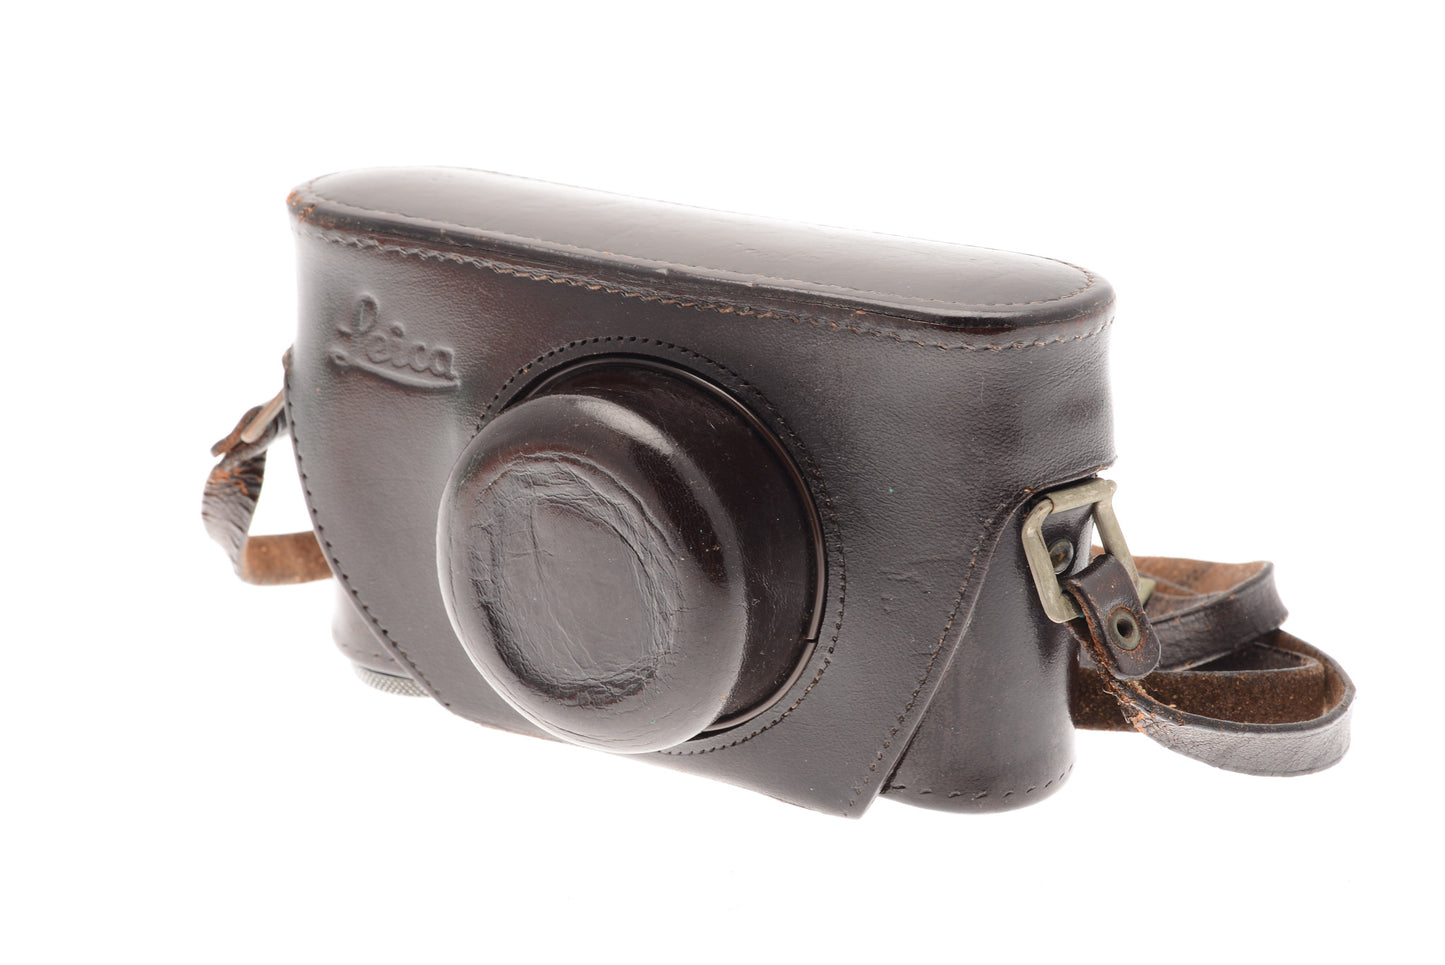 Leica Leather Case For IIIg - Accessory